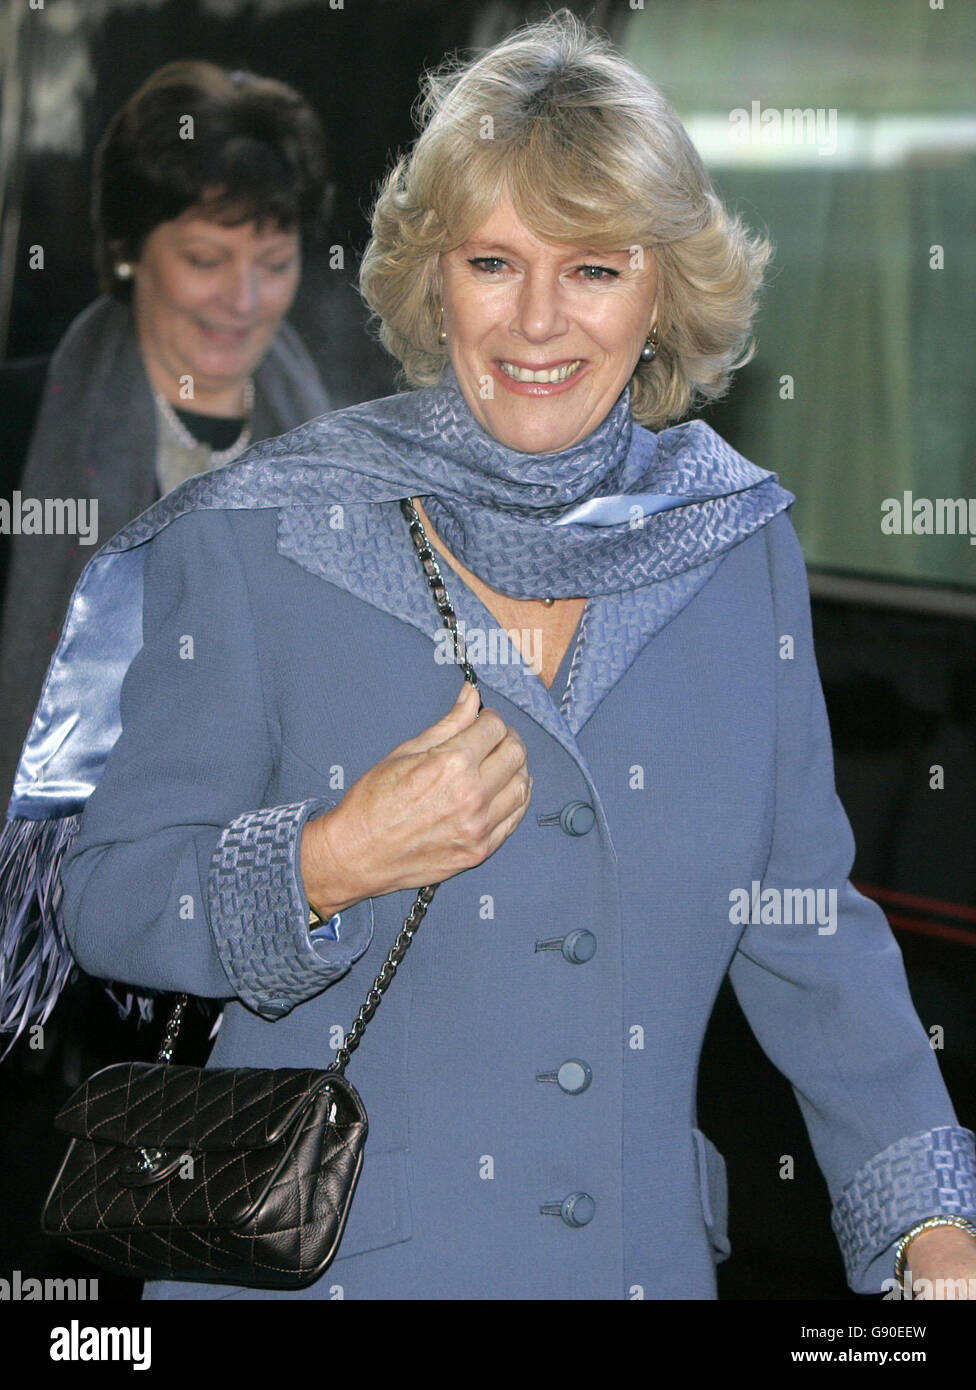 The Duchess of Cornwall smiles as she arrives at Warrington Bank Quay station with the Prince of Wales Friday November 18, 2005, ahead of a day of visits in Cheshire and Merseyside. See PA story ROYAL Charles. PRESS ASSOCIATION Photo. Photo credit should read: Phil Noble/PA. Stock Photo